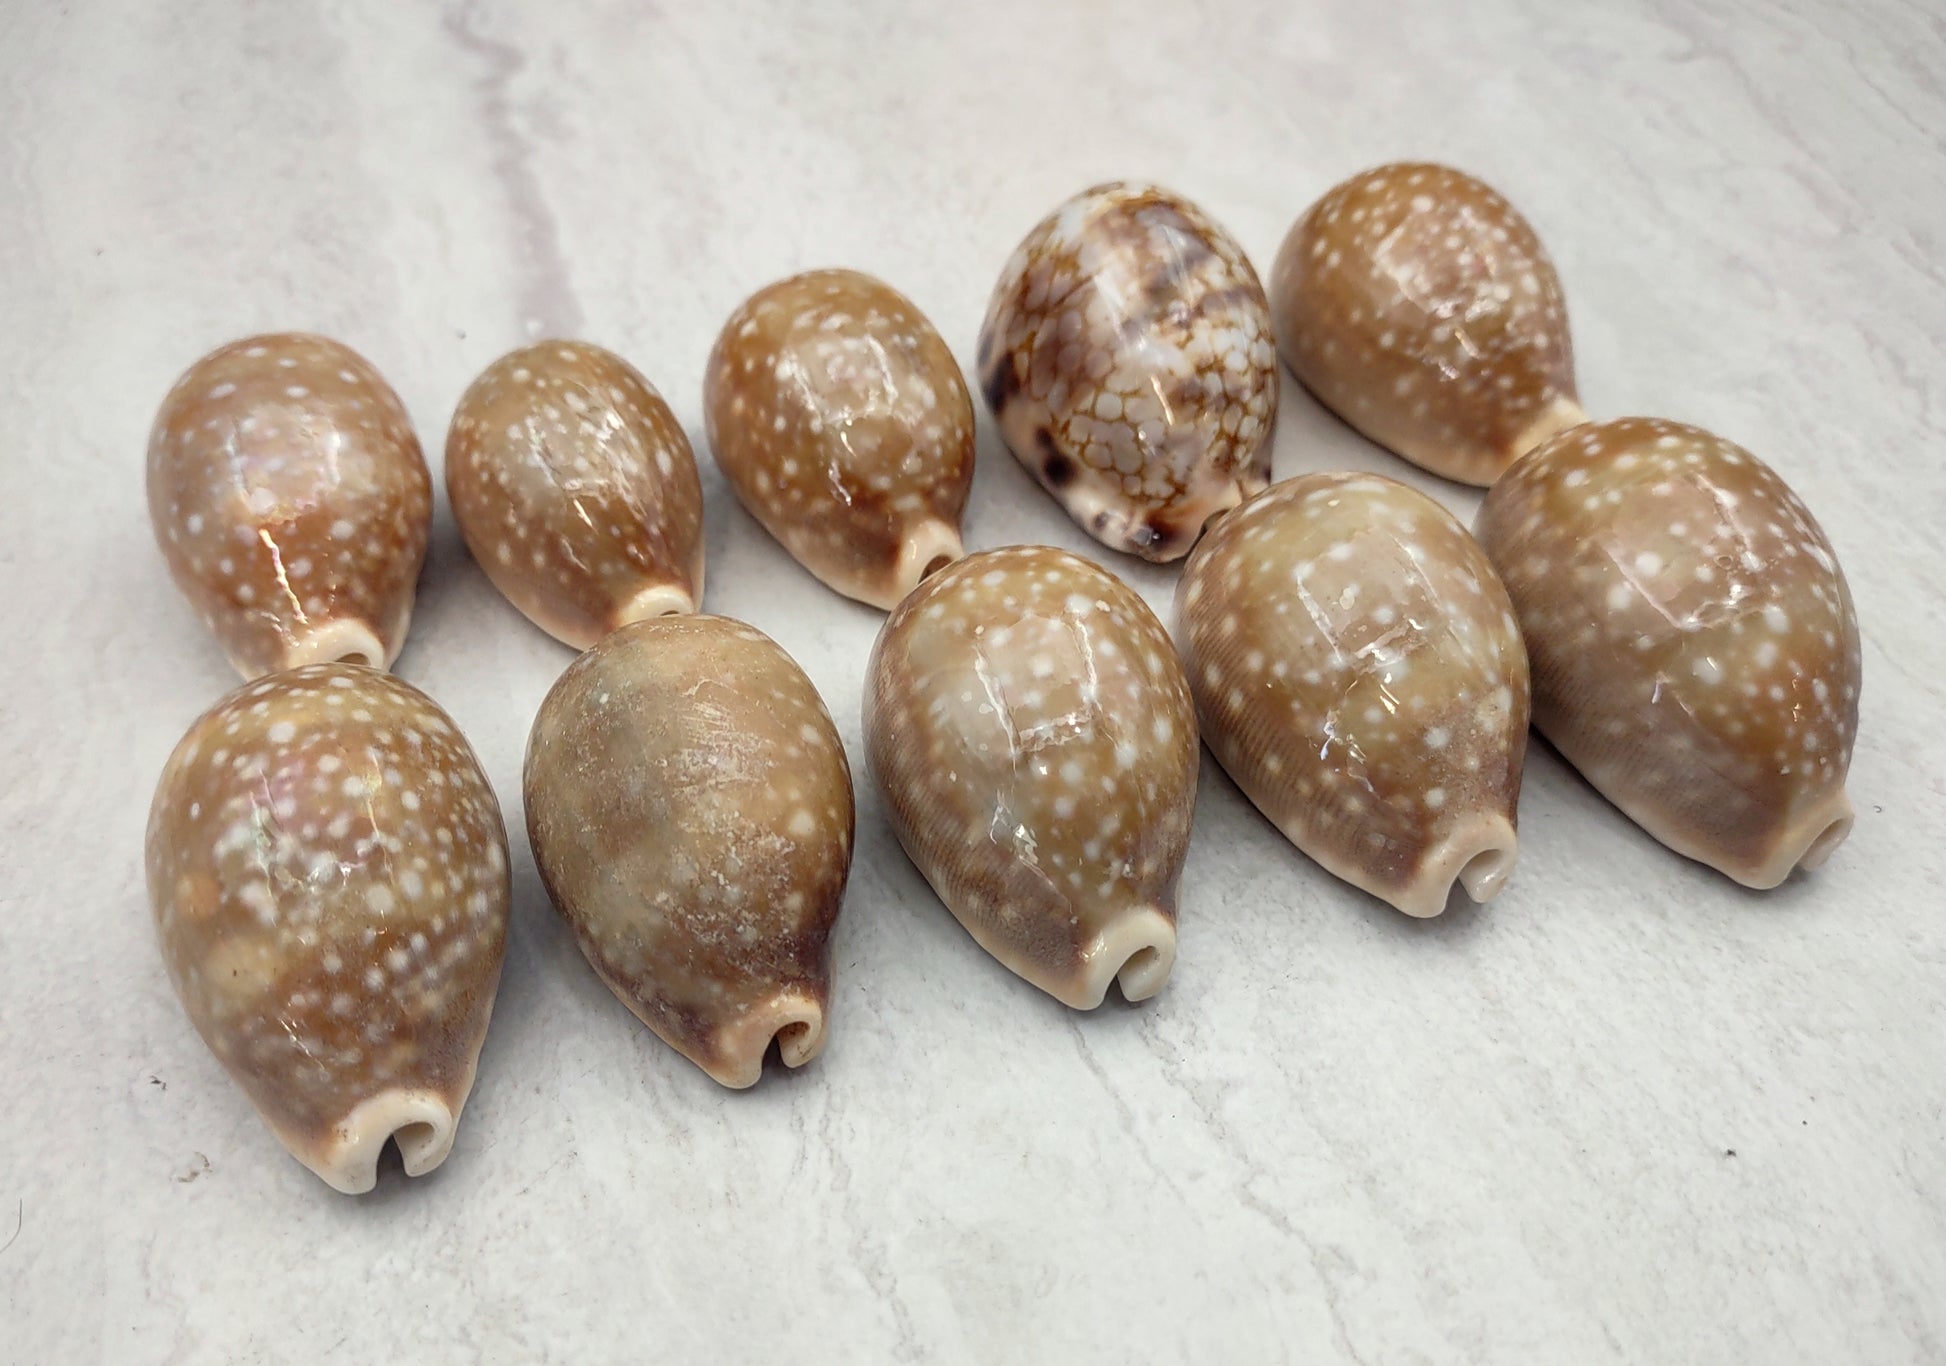 Calf Cowrie Shells - Cypraea Vitellus - (4 shells approx. 2 inches). multiple tan and white spotted shells with teal stripe in pile. Copyright 2022 SeaShellSupply.com.